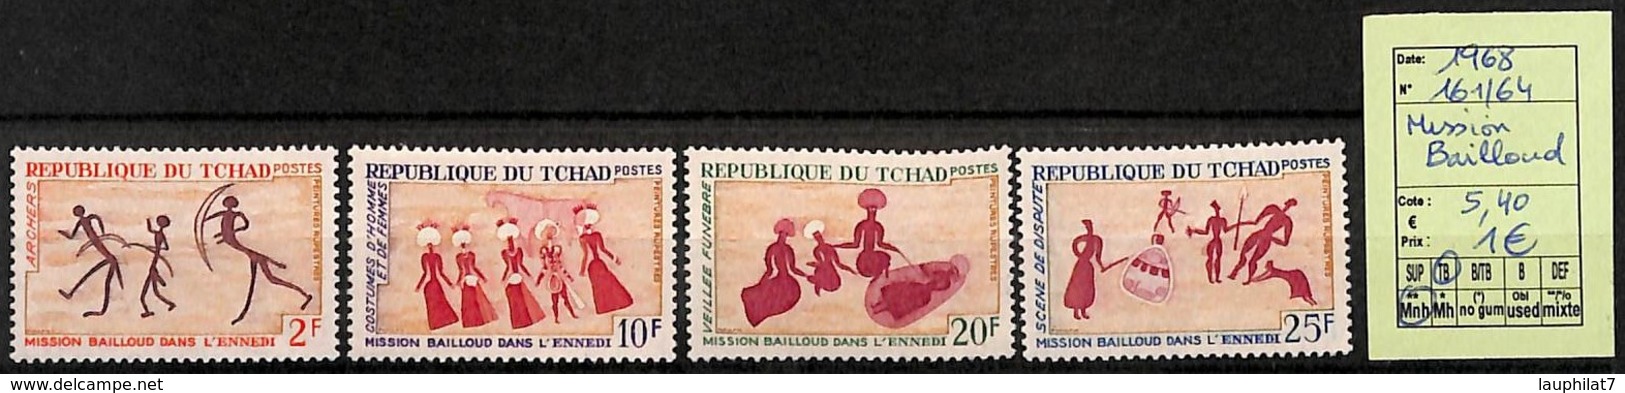 [822299]Tchad 1968 - N° 161/64, Mission Bailloud, Cultures - Tschad (1960-...)